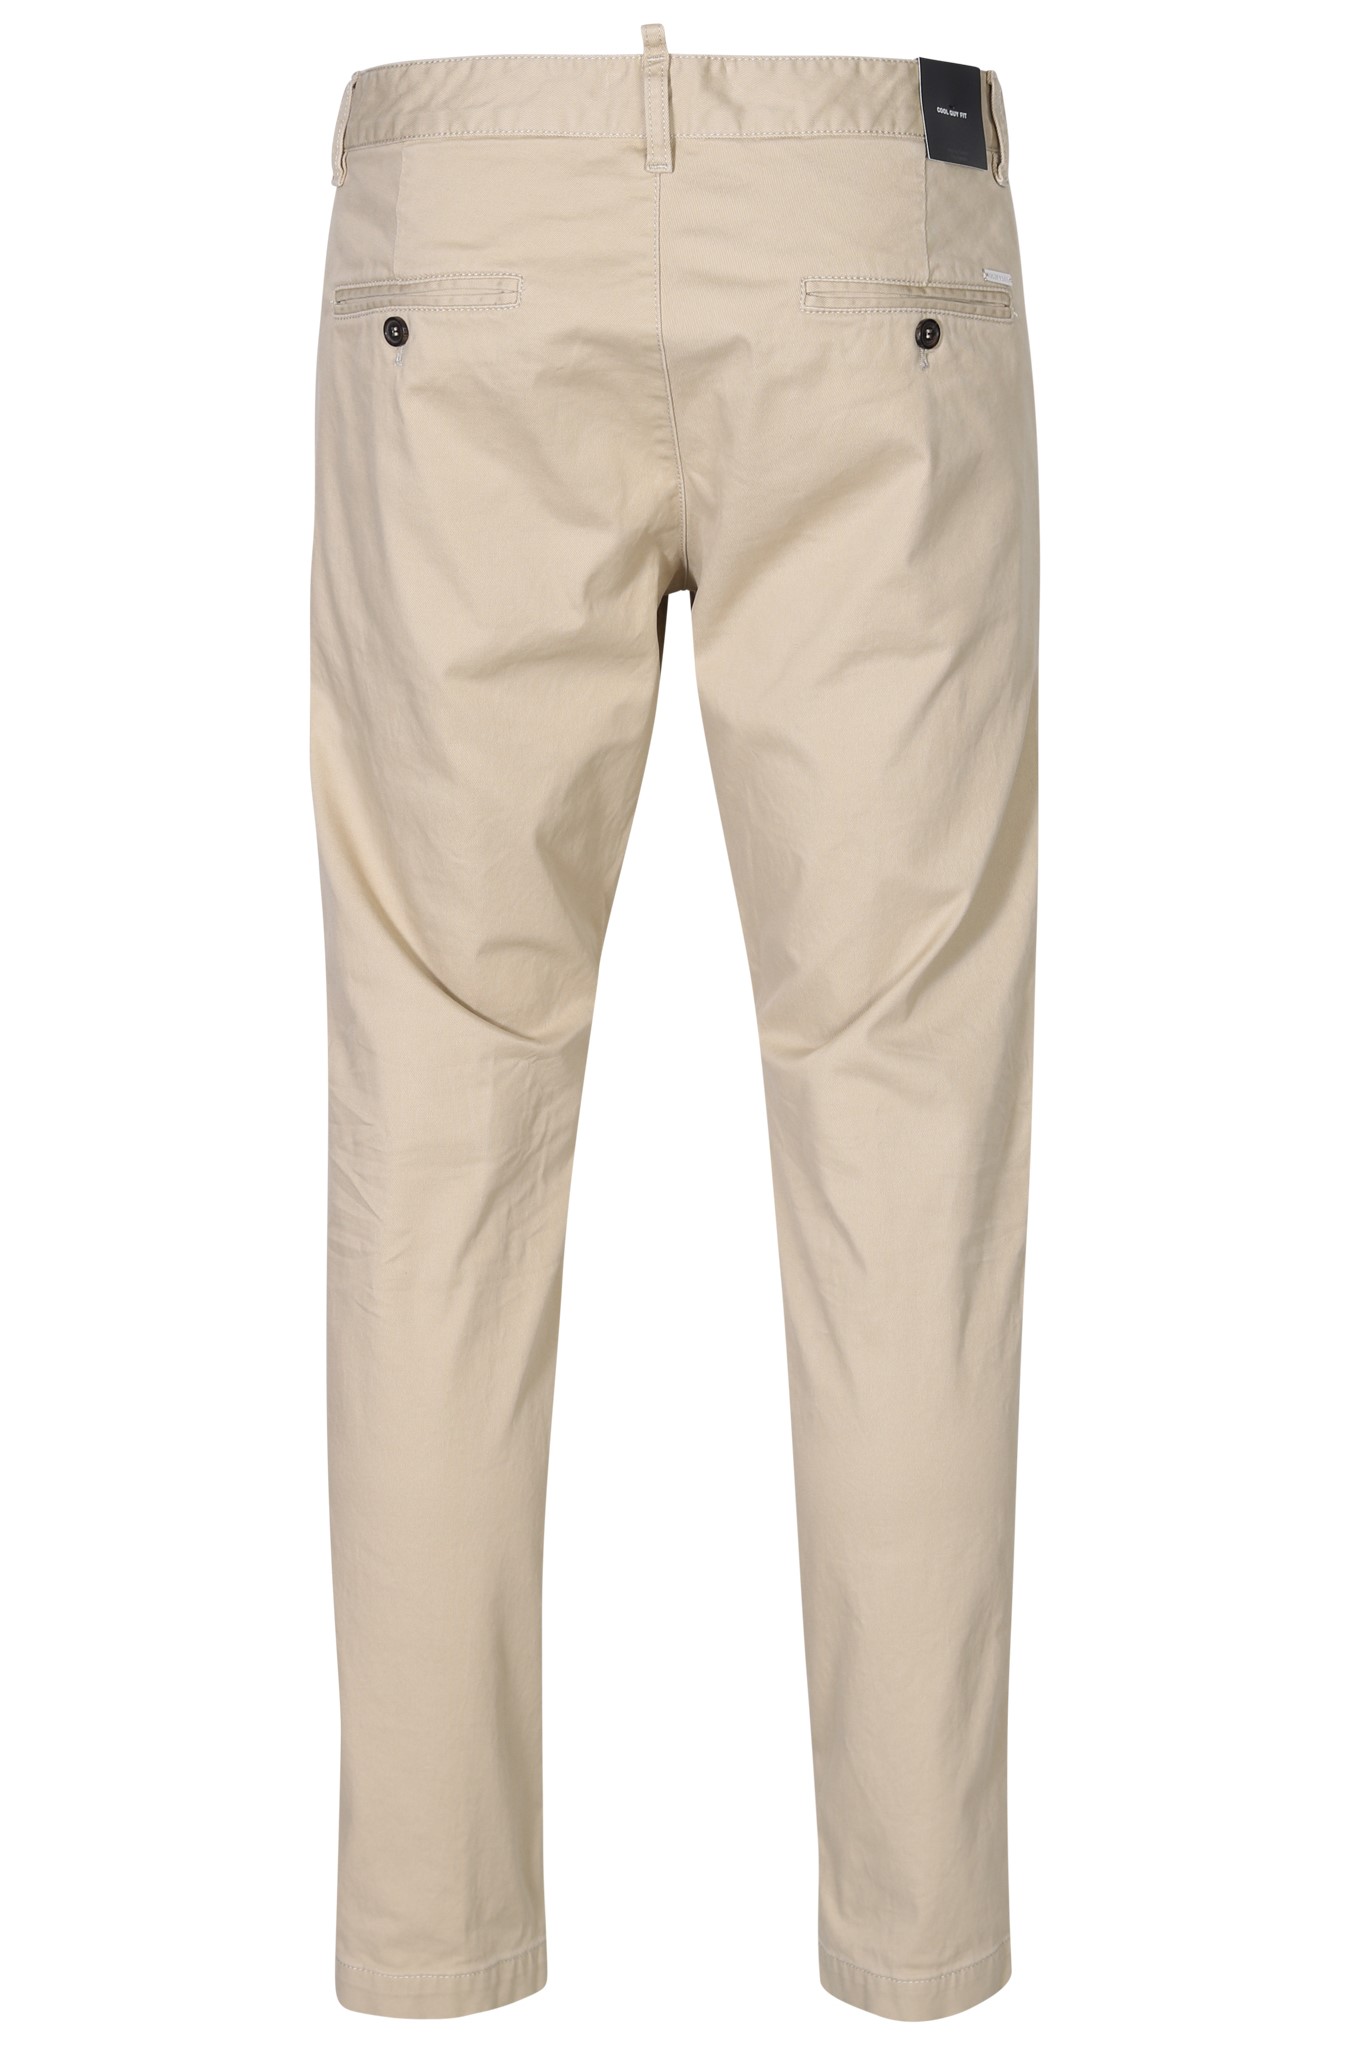 DSQUARED2 Cool Guy Chino Pant in Beige 56